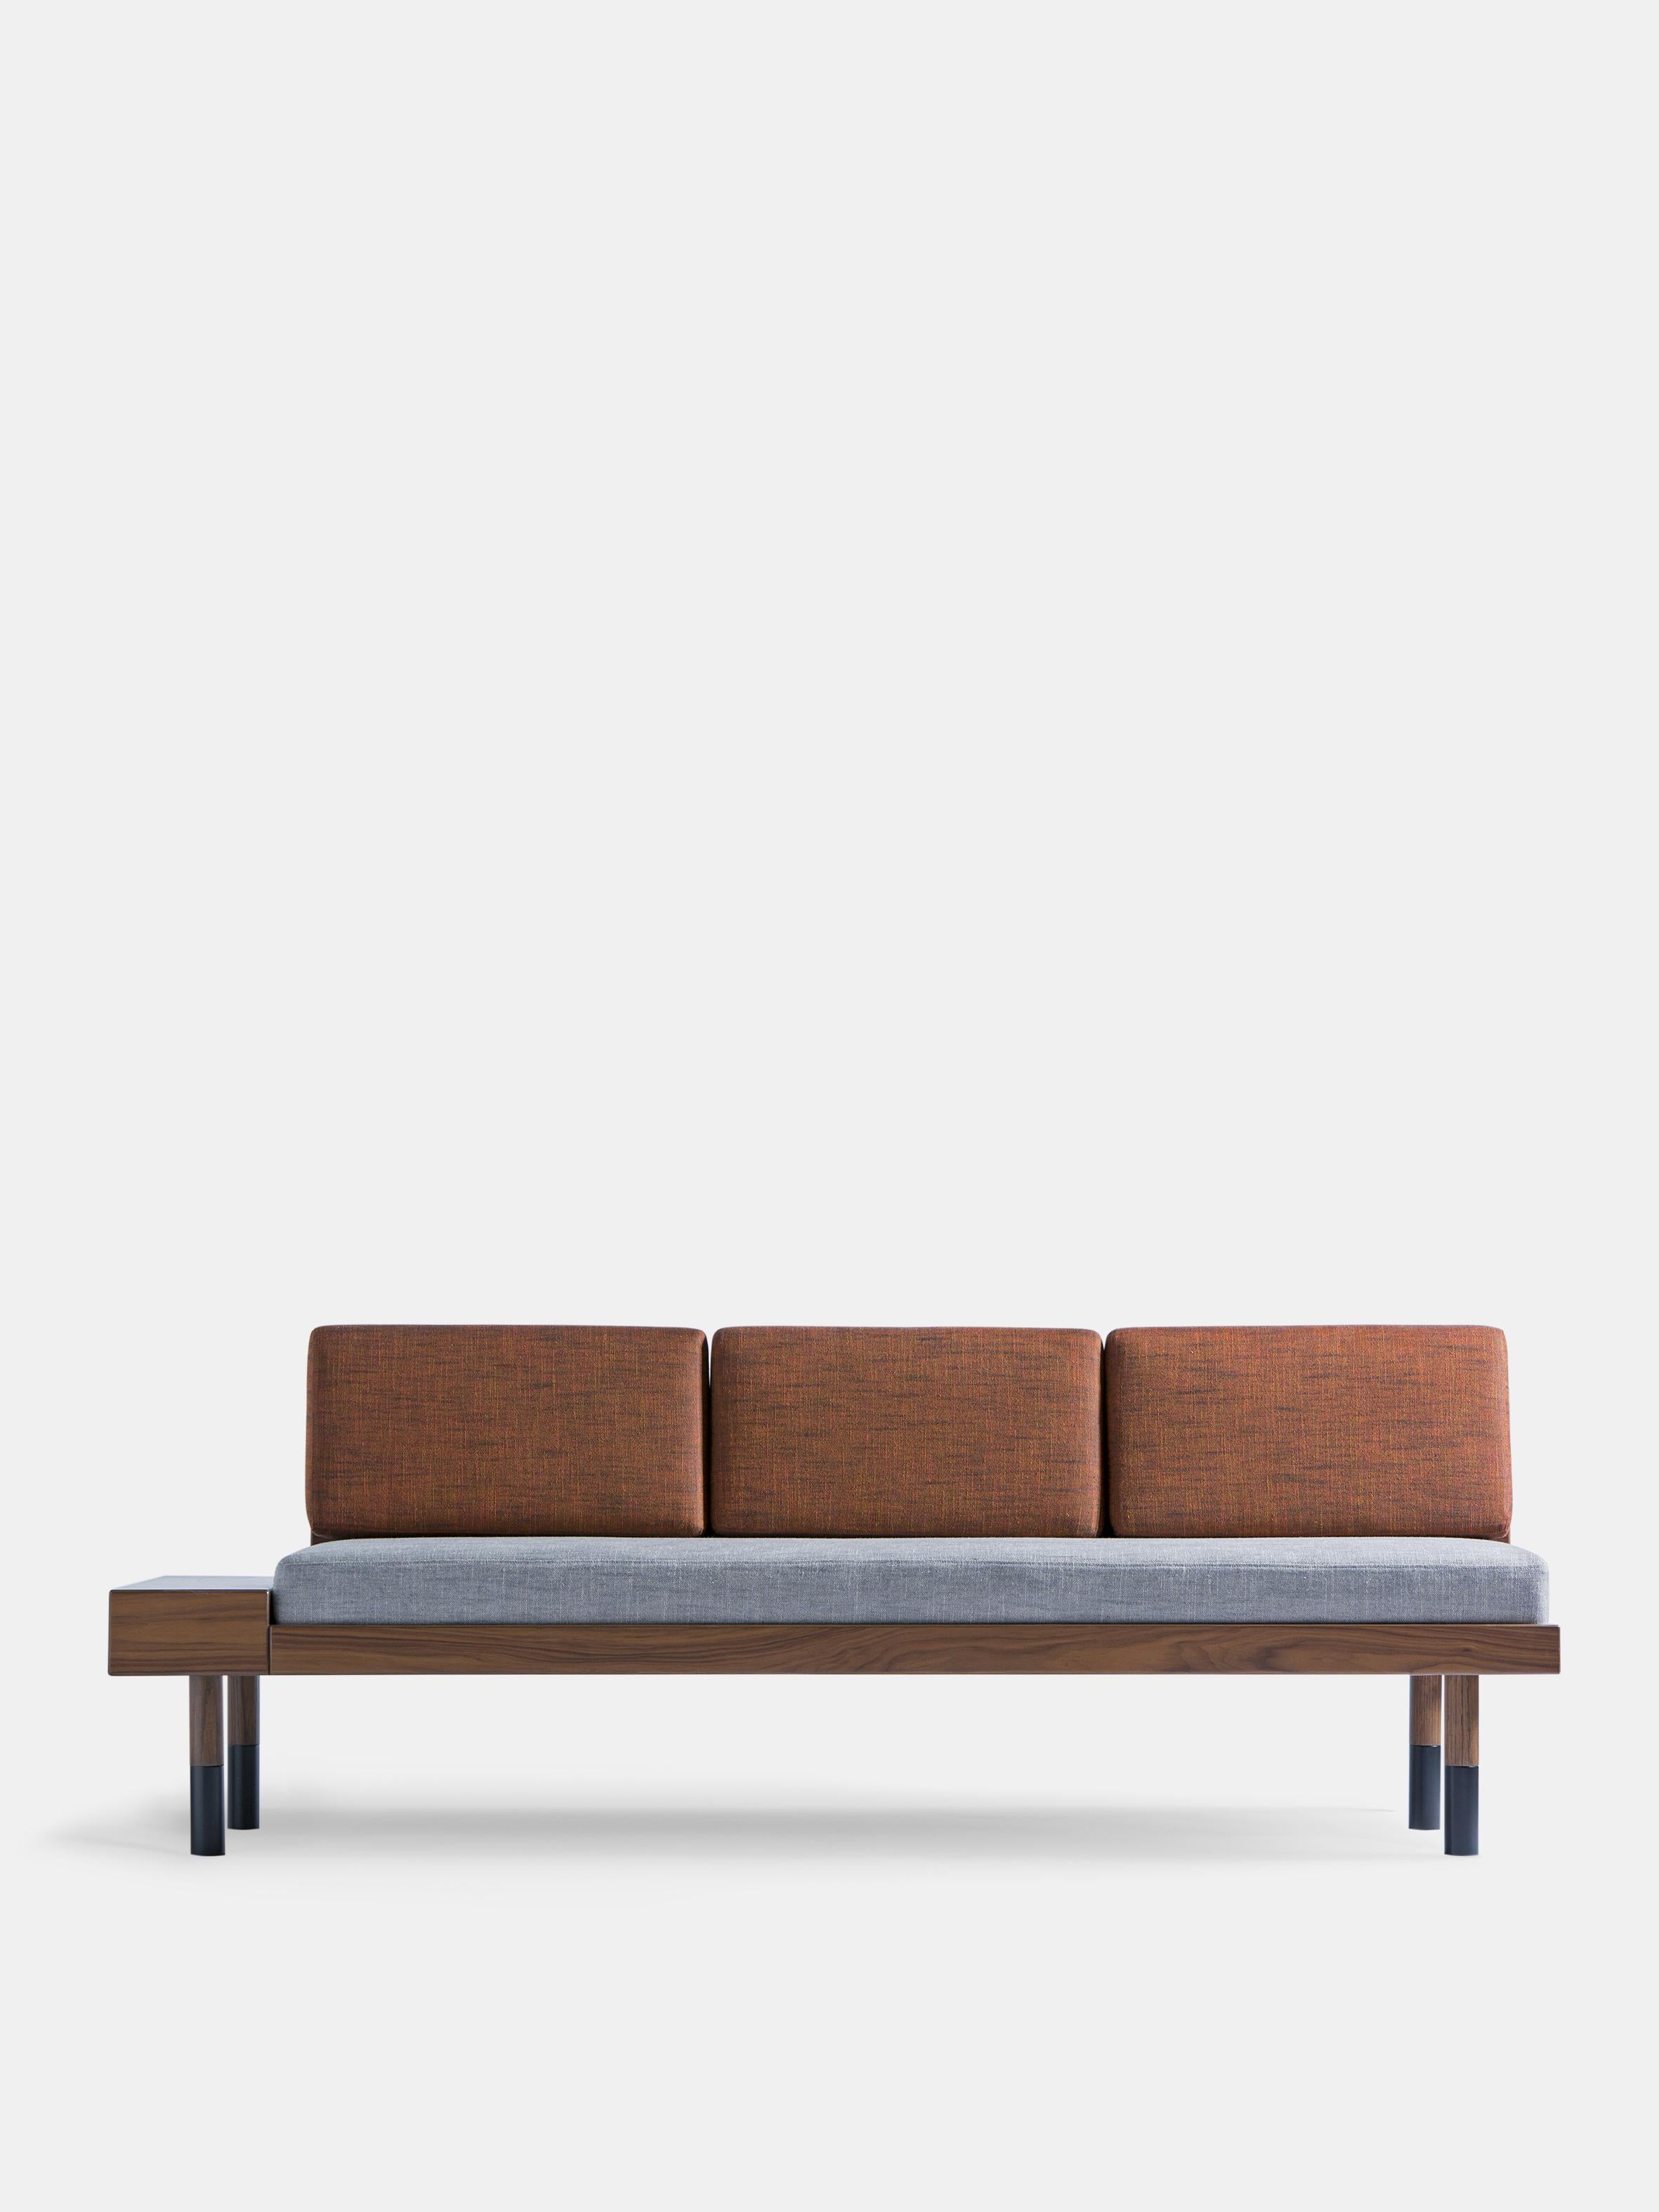 Grey and Brick Red Mid Sofa by Kann Design
Dimensions: D 70 x W 200 x H 74 cm.
Materials: Solid wood, steel, wood veneer, HR foam, fabric upholstery - seating: Sahco Ellis 4
- back: Sahco Ellis 18 (70% viscose, 30 % linen).
Available in other